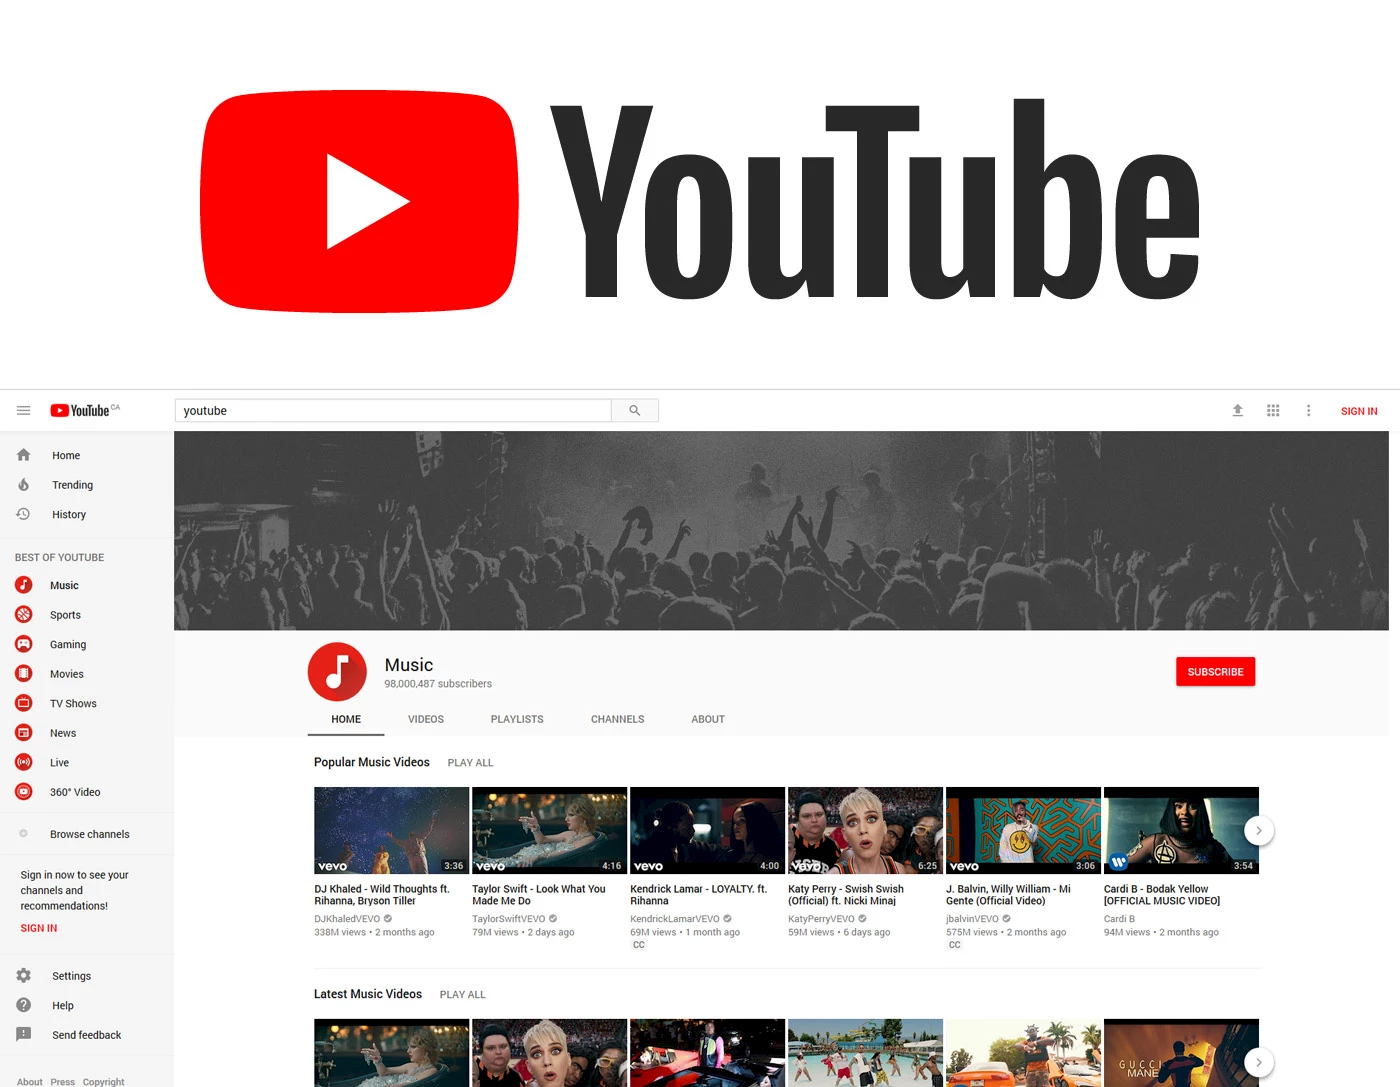 YouTube updates its logo and interface.